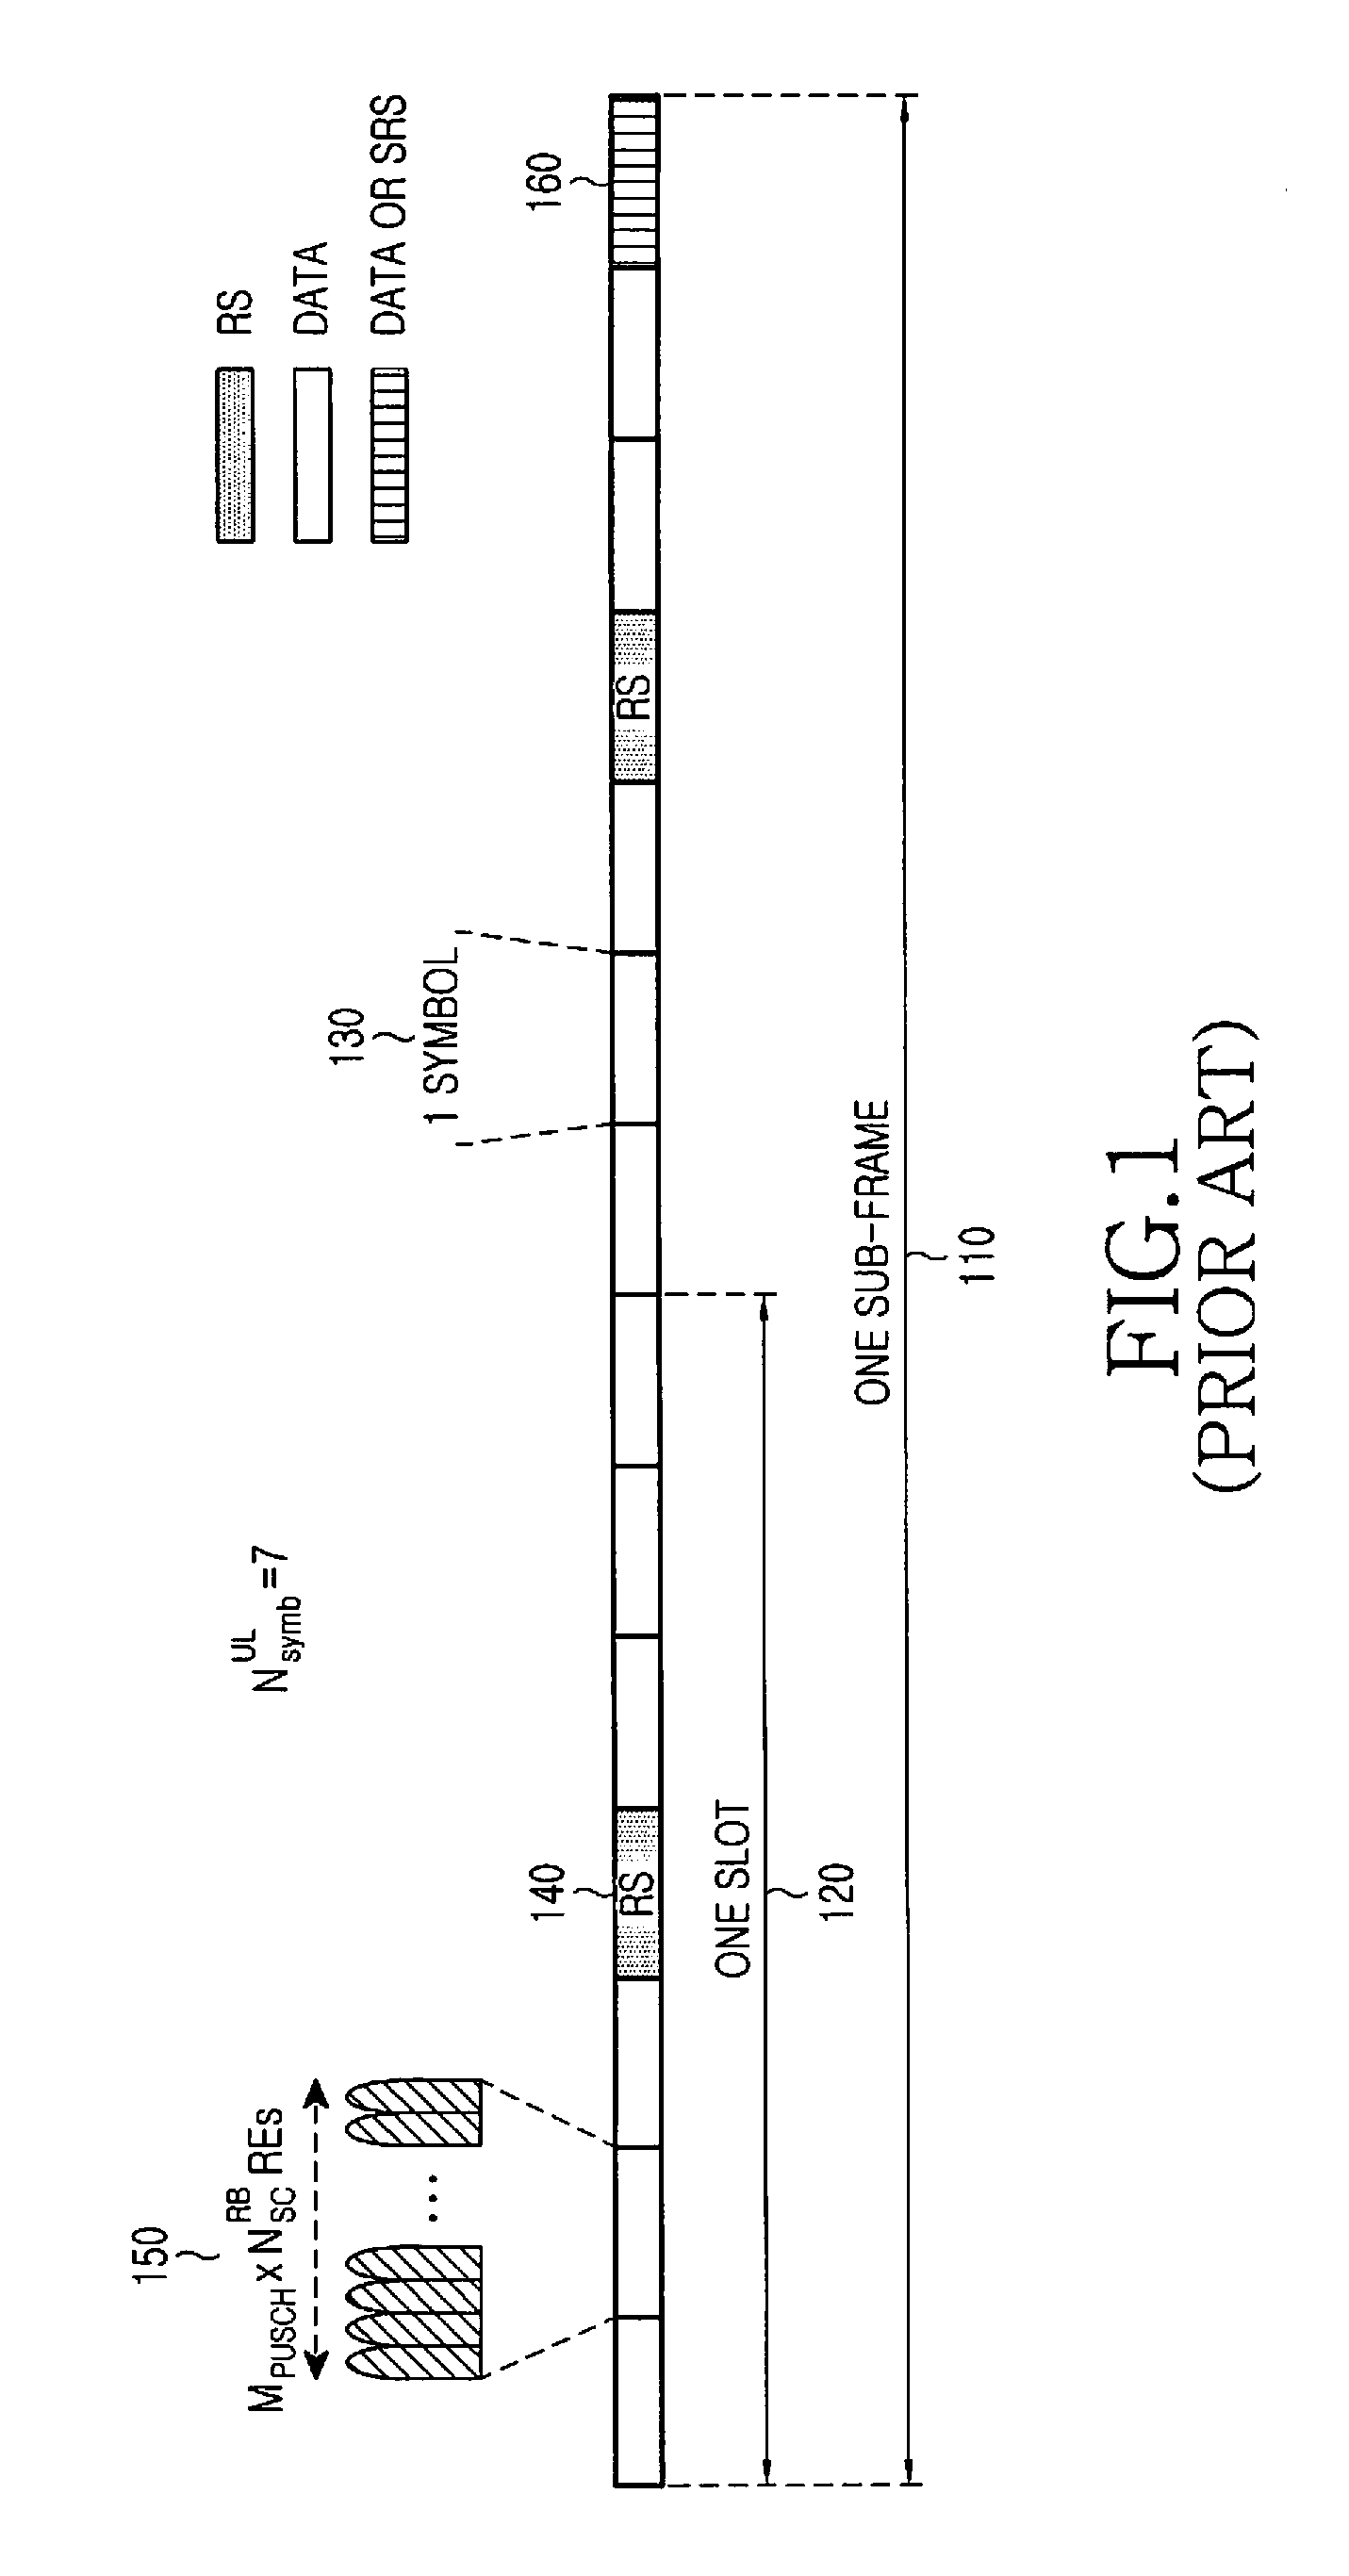 Multiplexing control and data information from a user equipment in a physical data channel